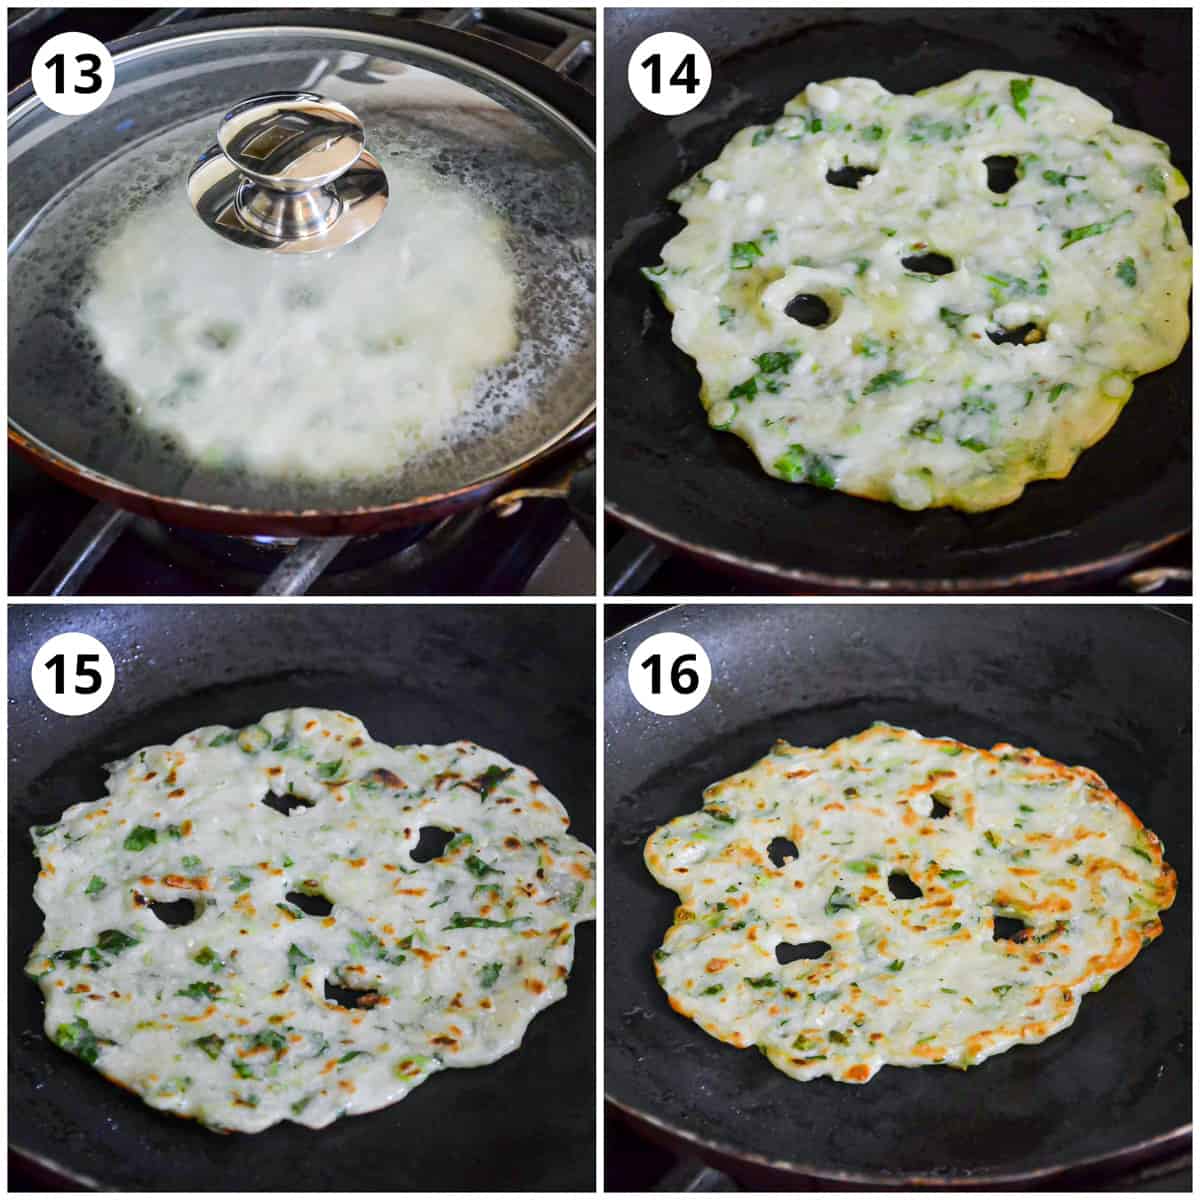 Cooking and flipping the savory pancake in a pan until golden brown.